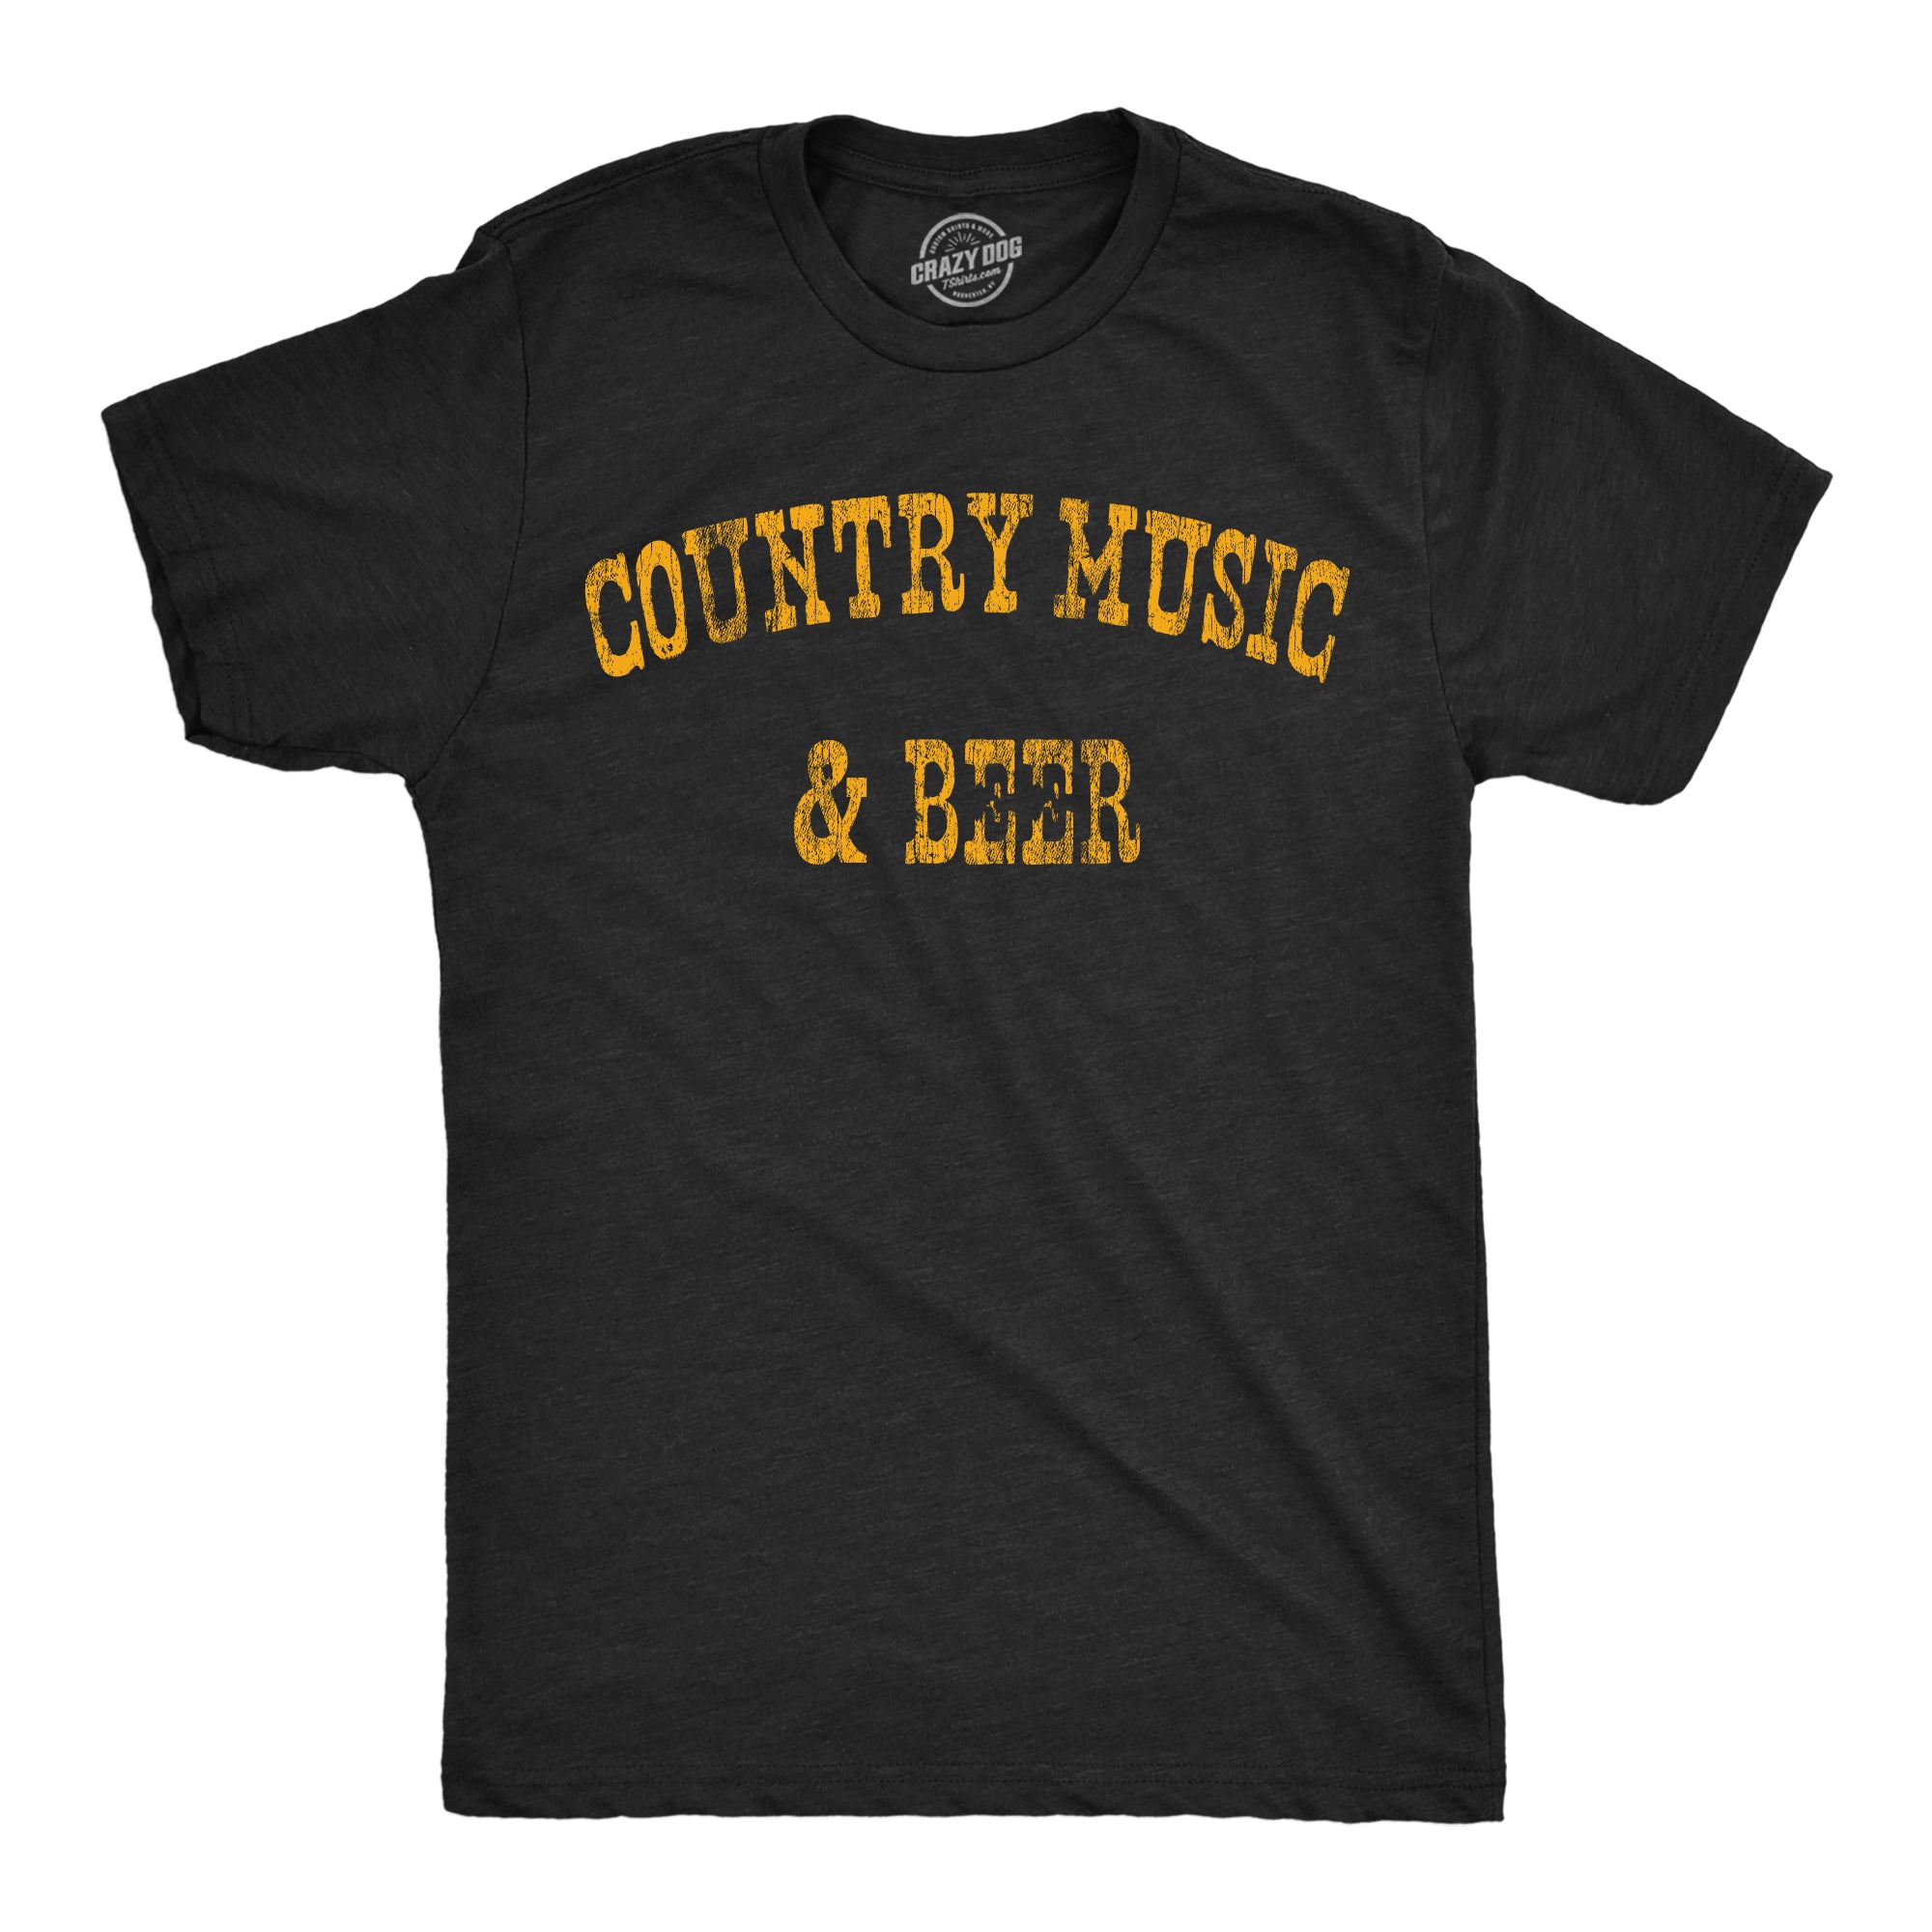 Funny Heather Black - Country Music And Beer Country Music And Beer Mens T Shirt Nerdy Music Beer Tee